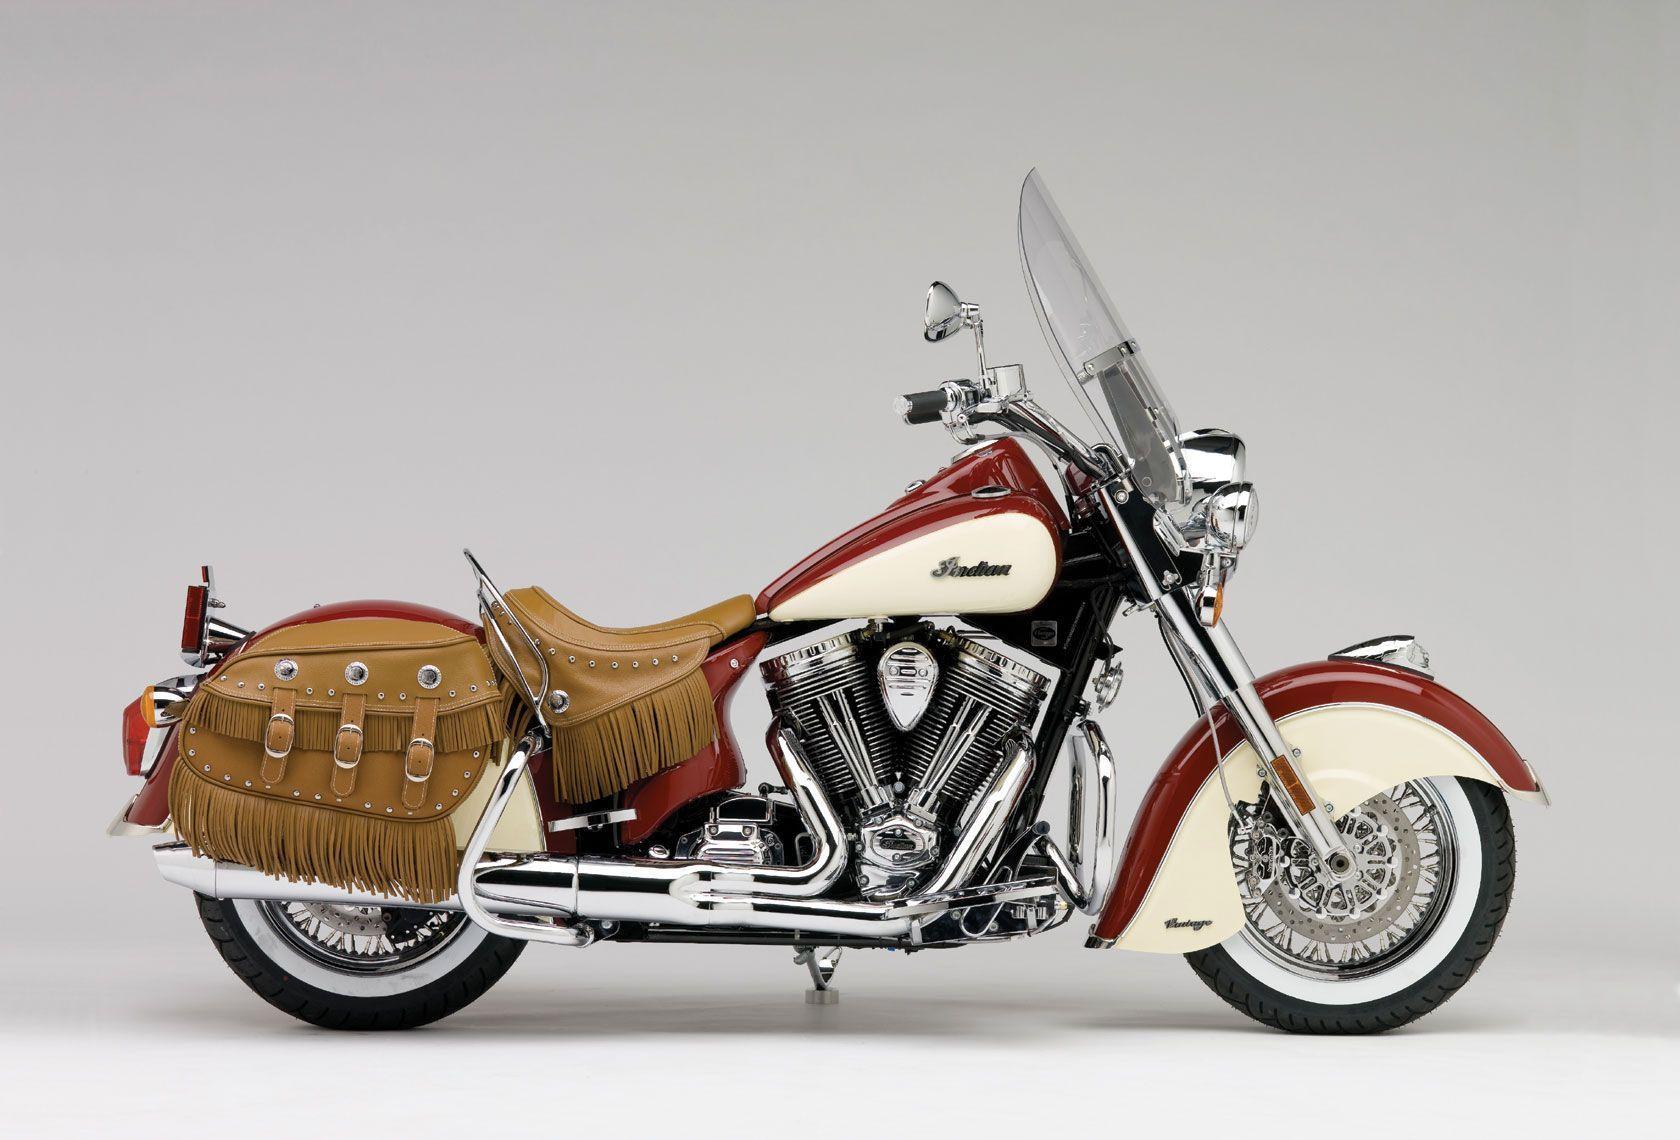 Vintage Indian Motorcycles Wallpapers Hd Pictures 4 HD Wallpapers